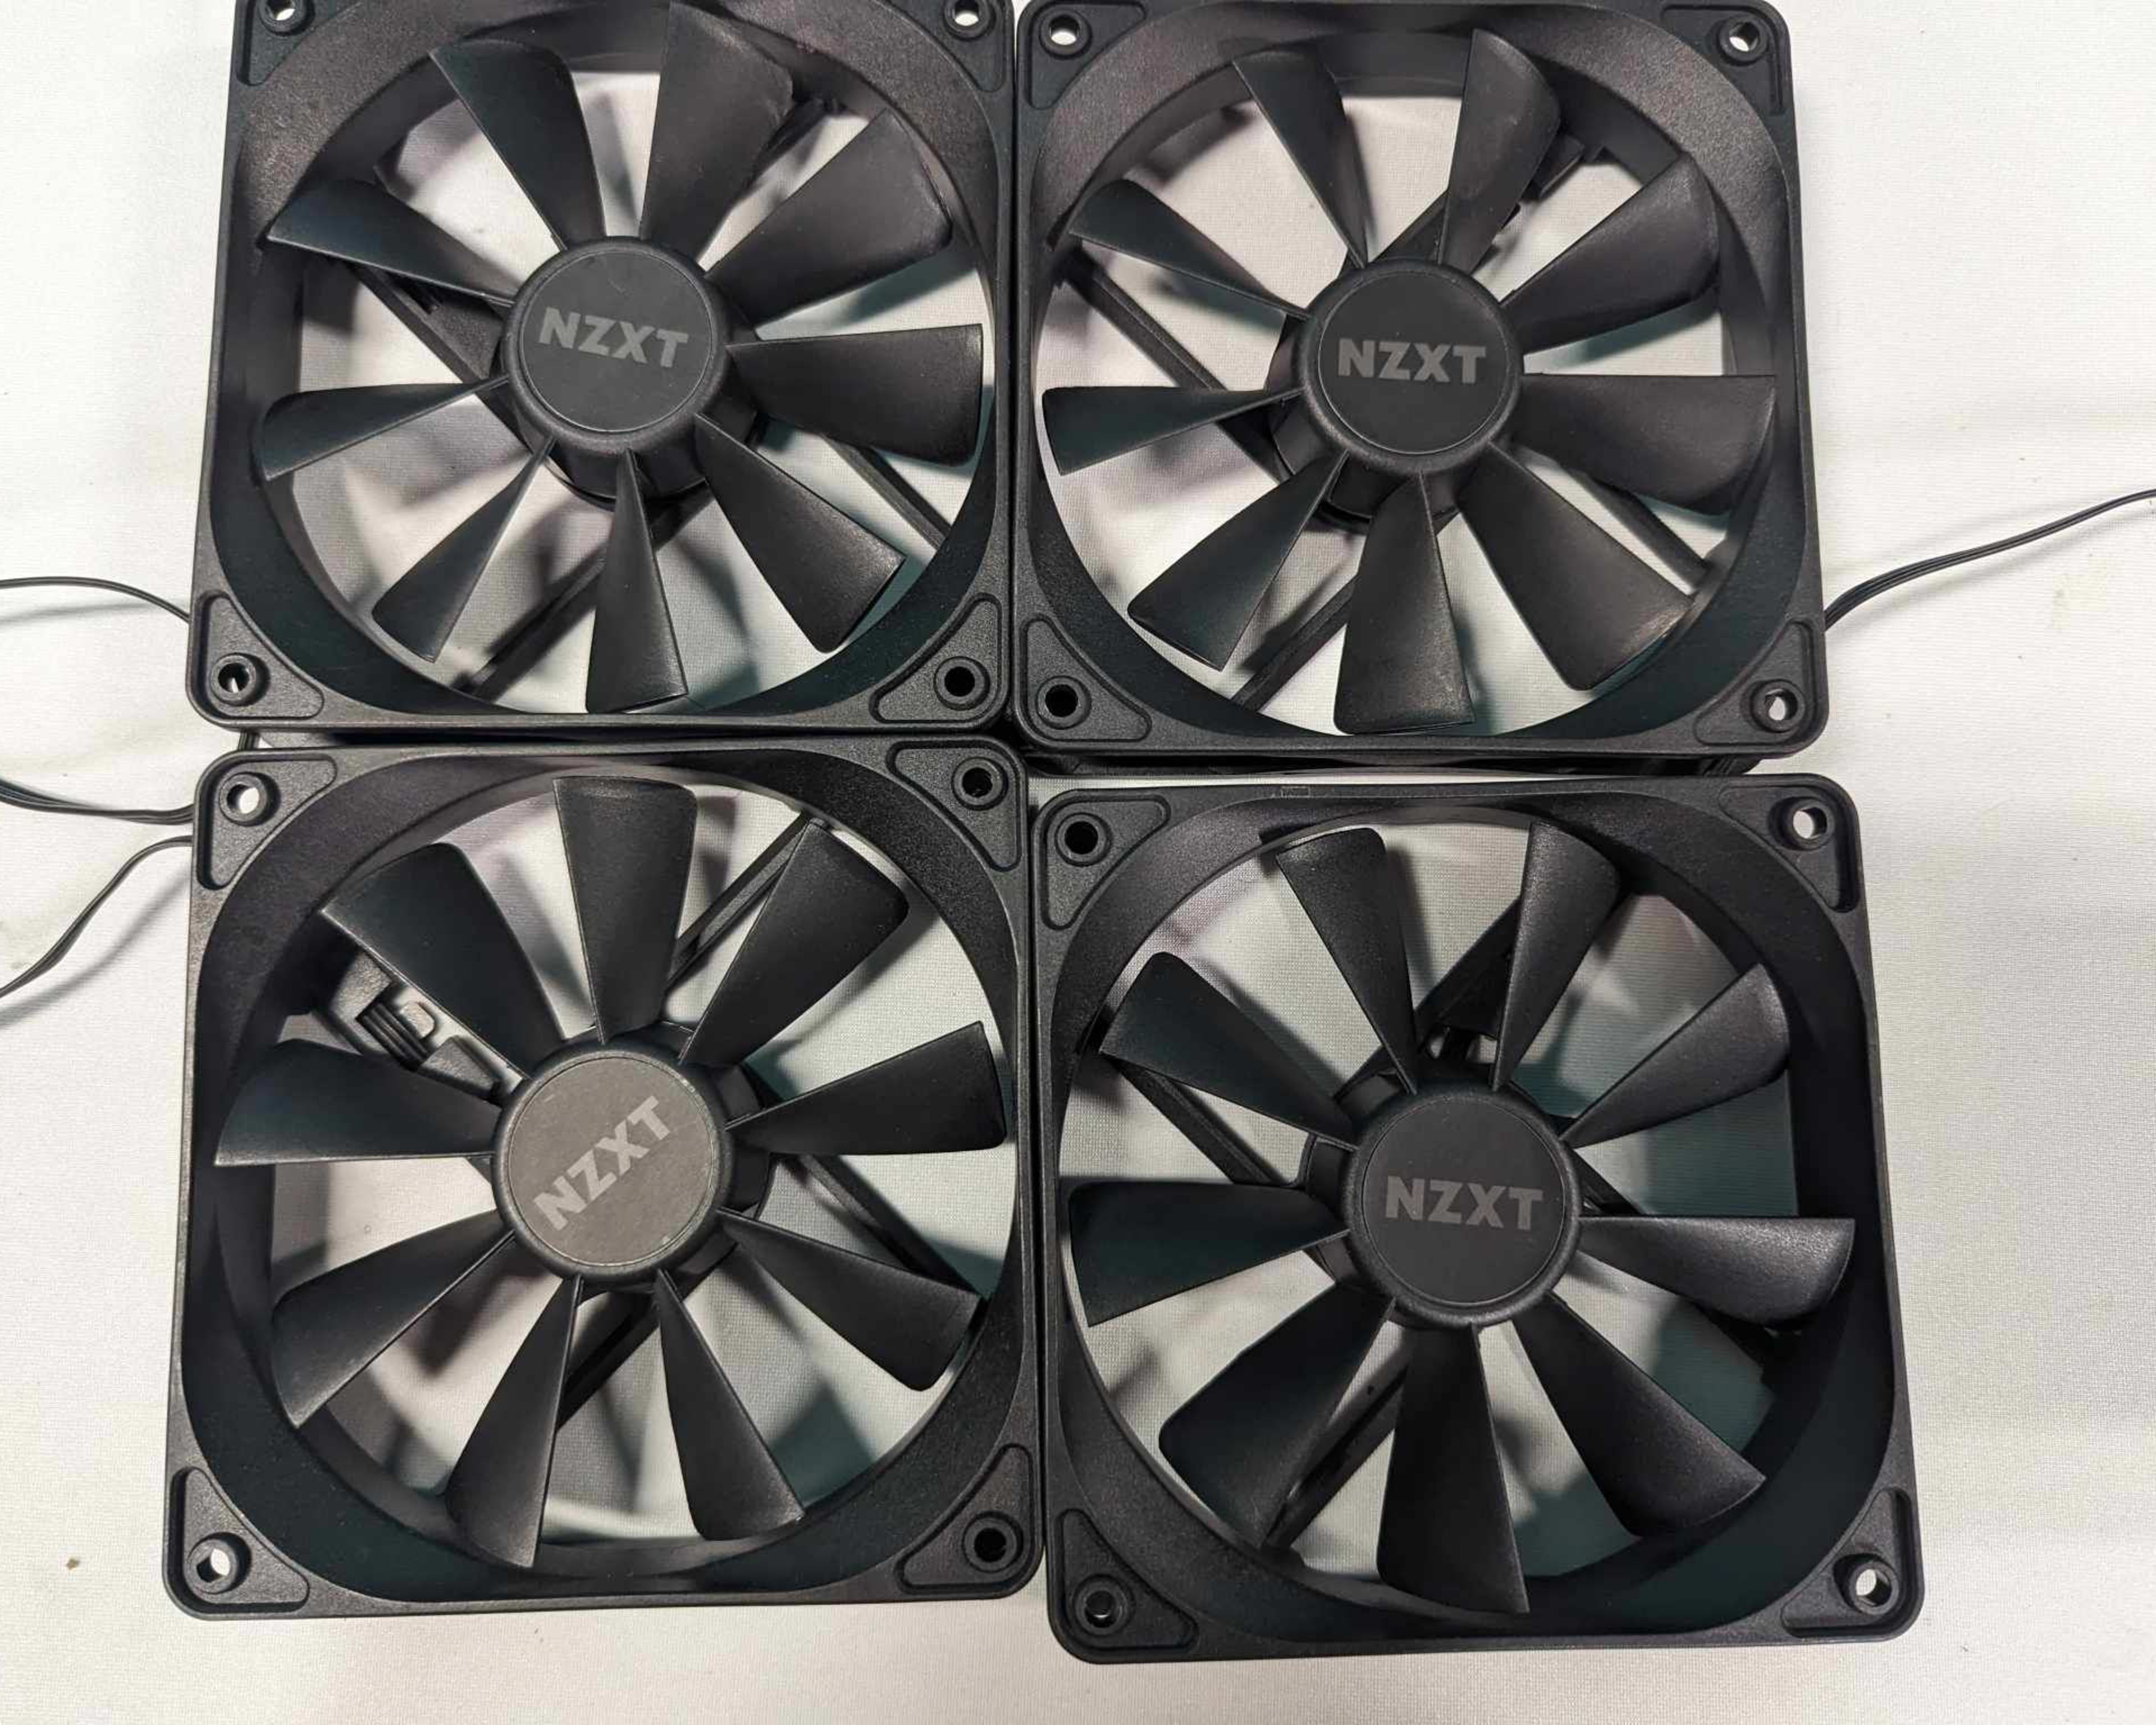 4 New NZXT 120mm Fans. (PWM). Free Ship!